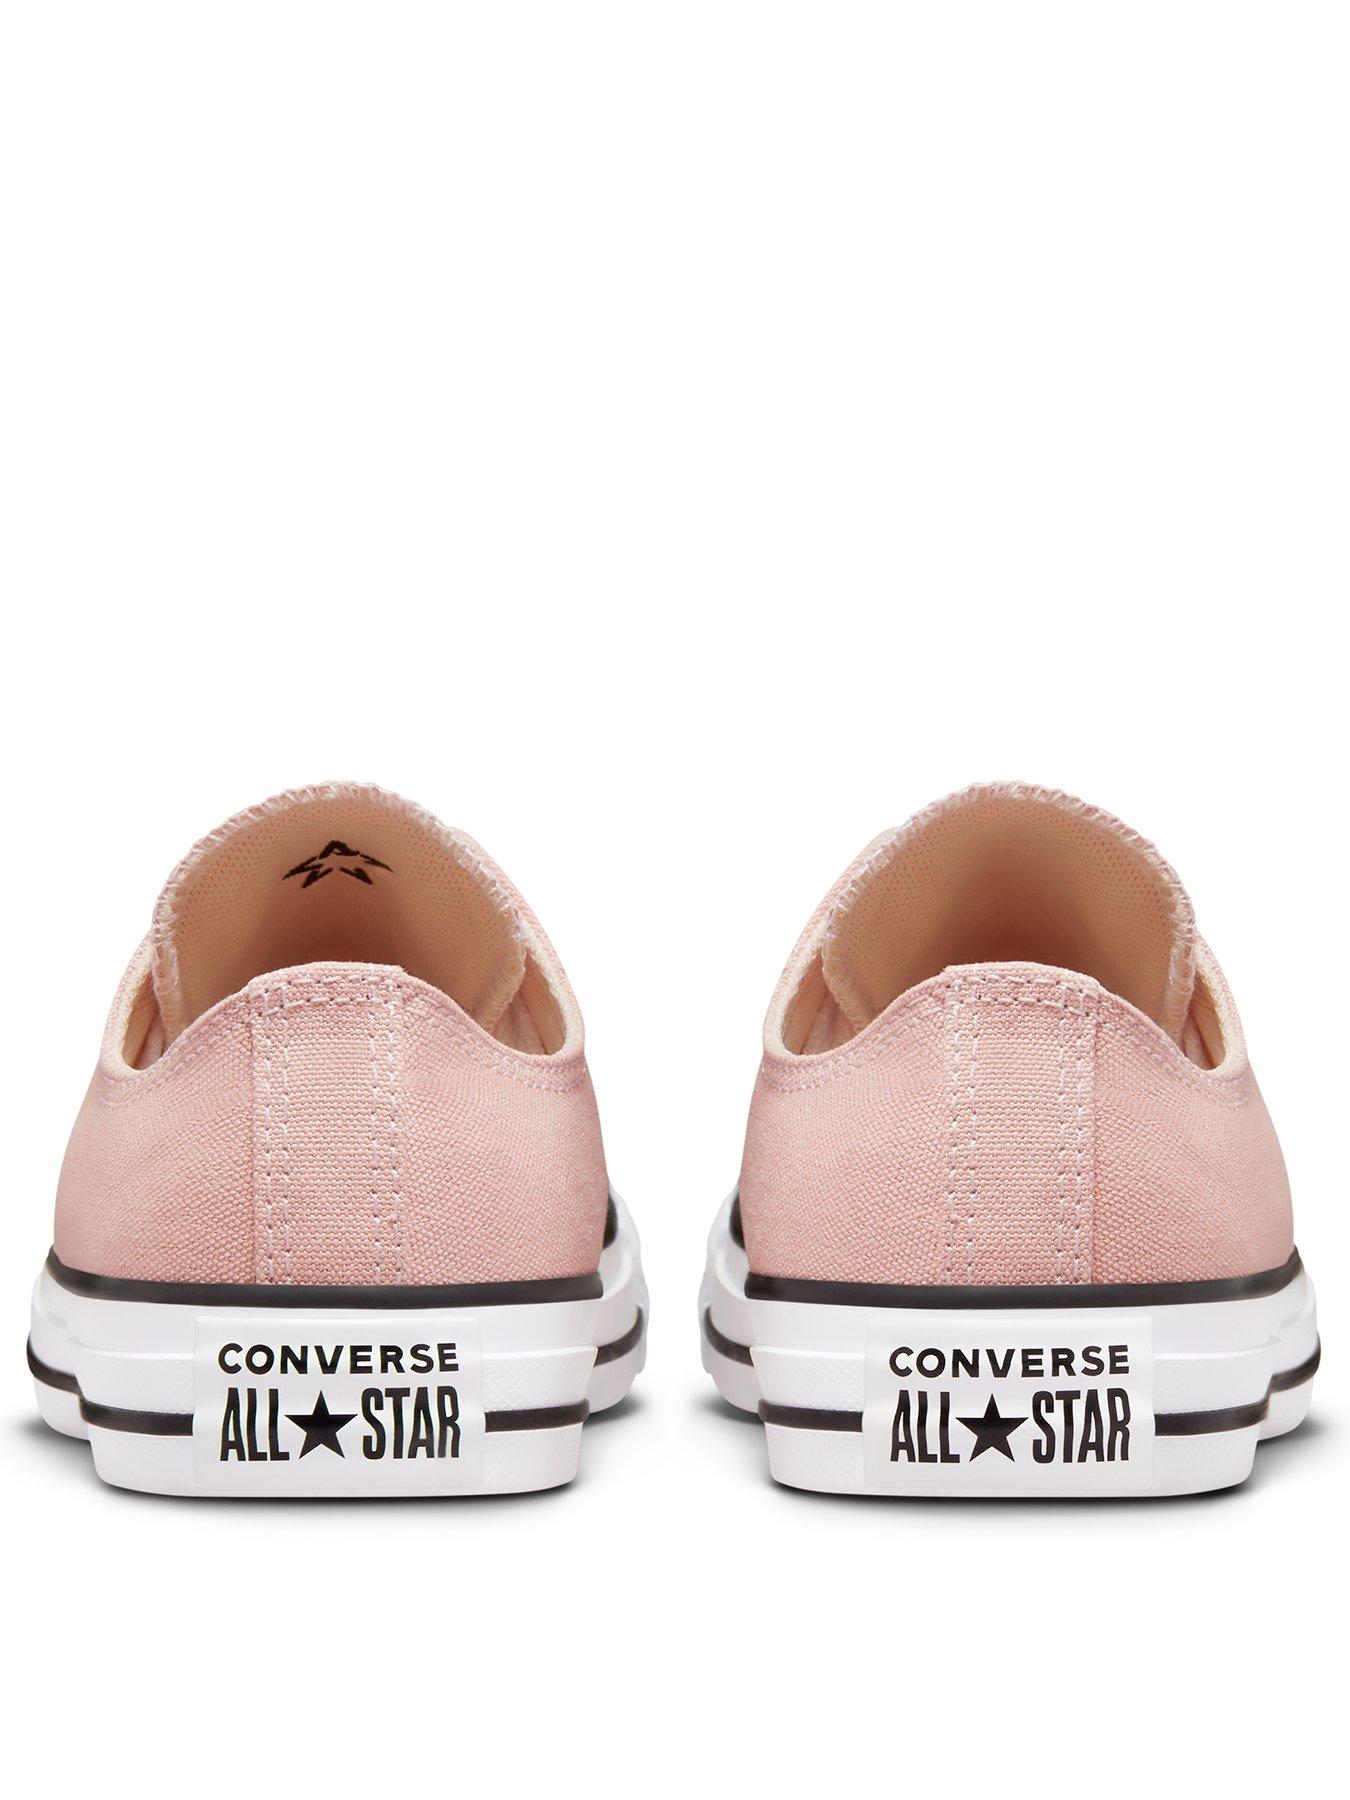  Chuck Taylor All Star 50/50 Recycled Cotton Ox Plimsoll - Pink